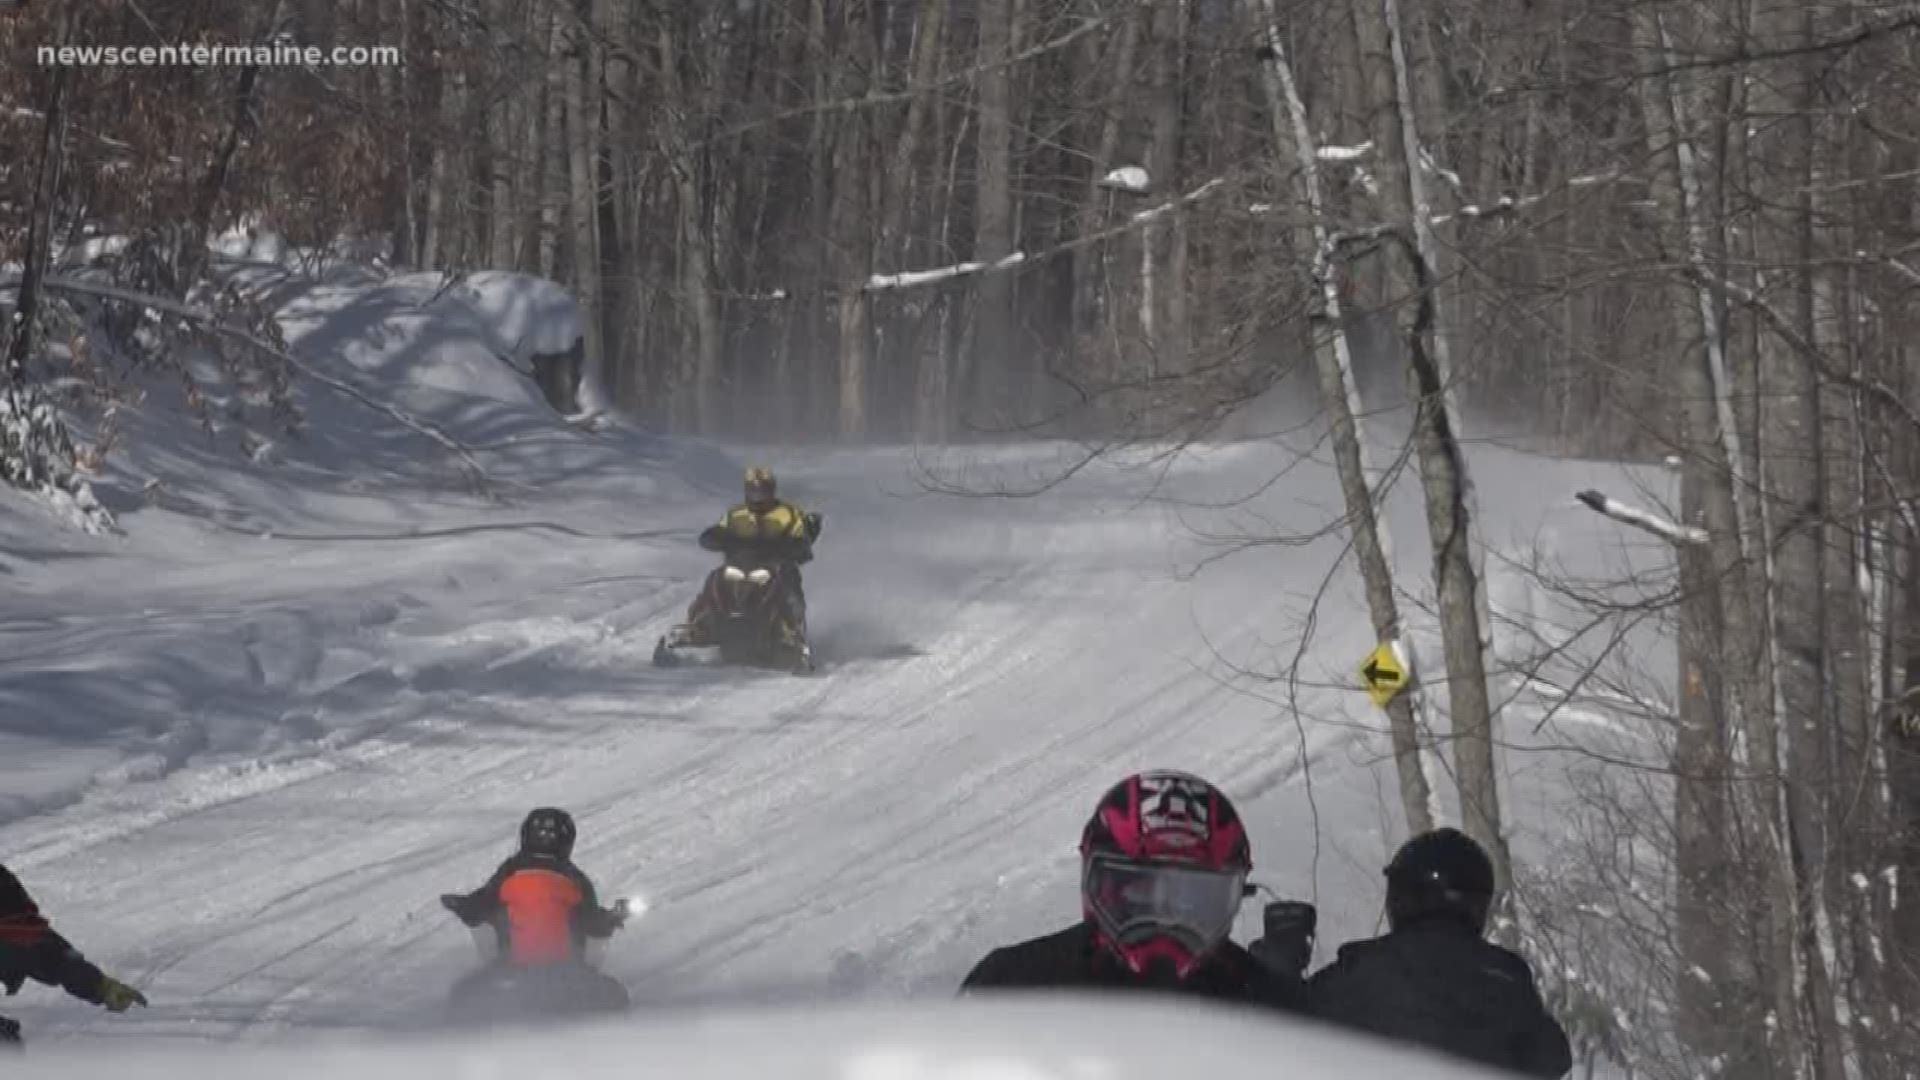 After recent snowmobile accidents, game wardens make sure riders are staying safe.